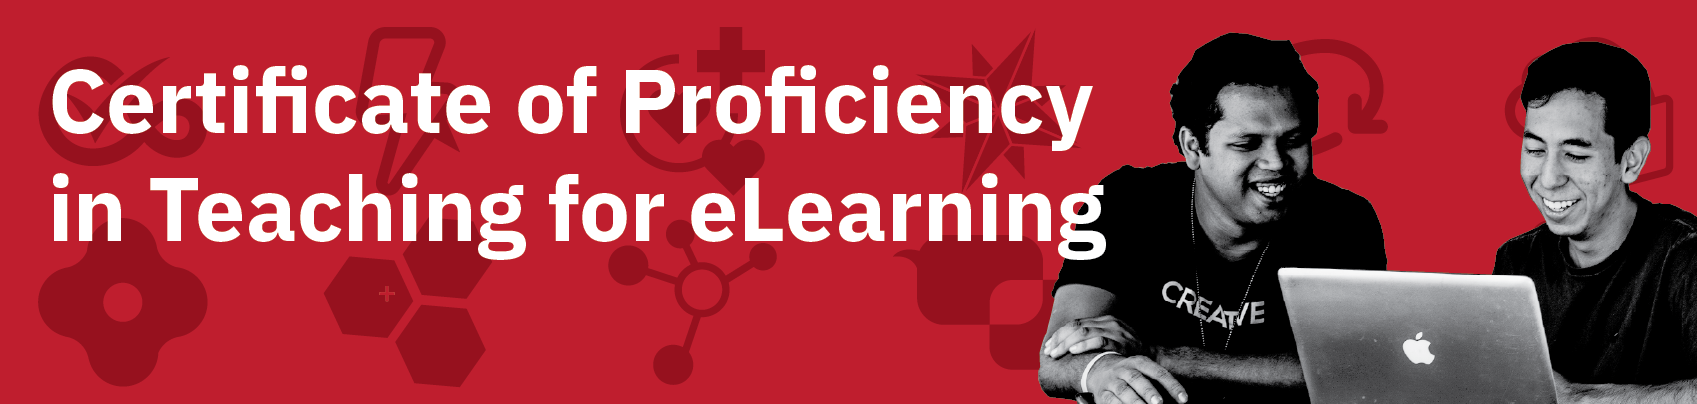 Banner with text reading "Certificate of Proficiency in Teaching for eLearning"